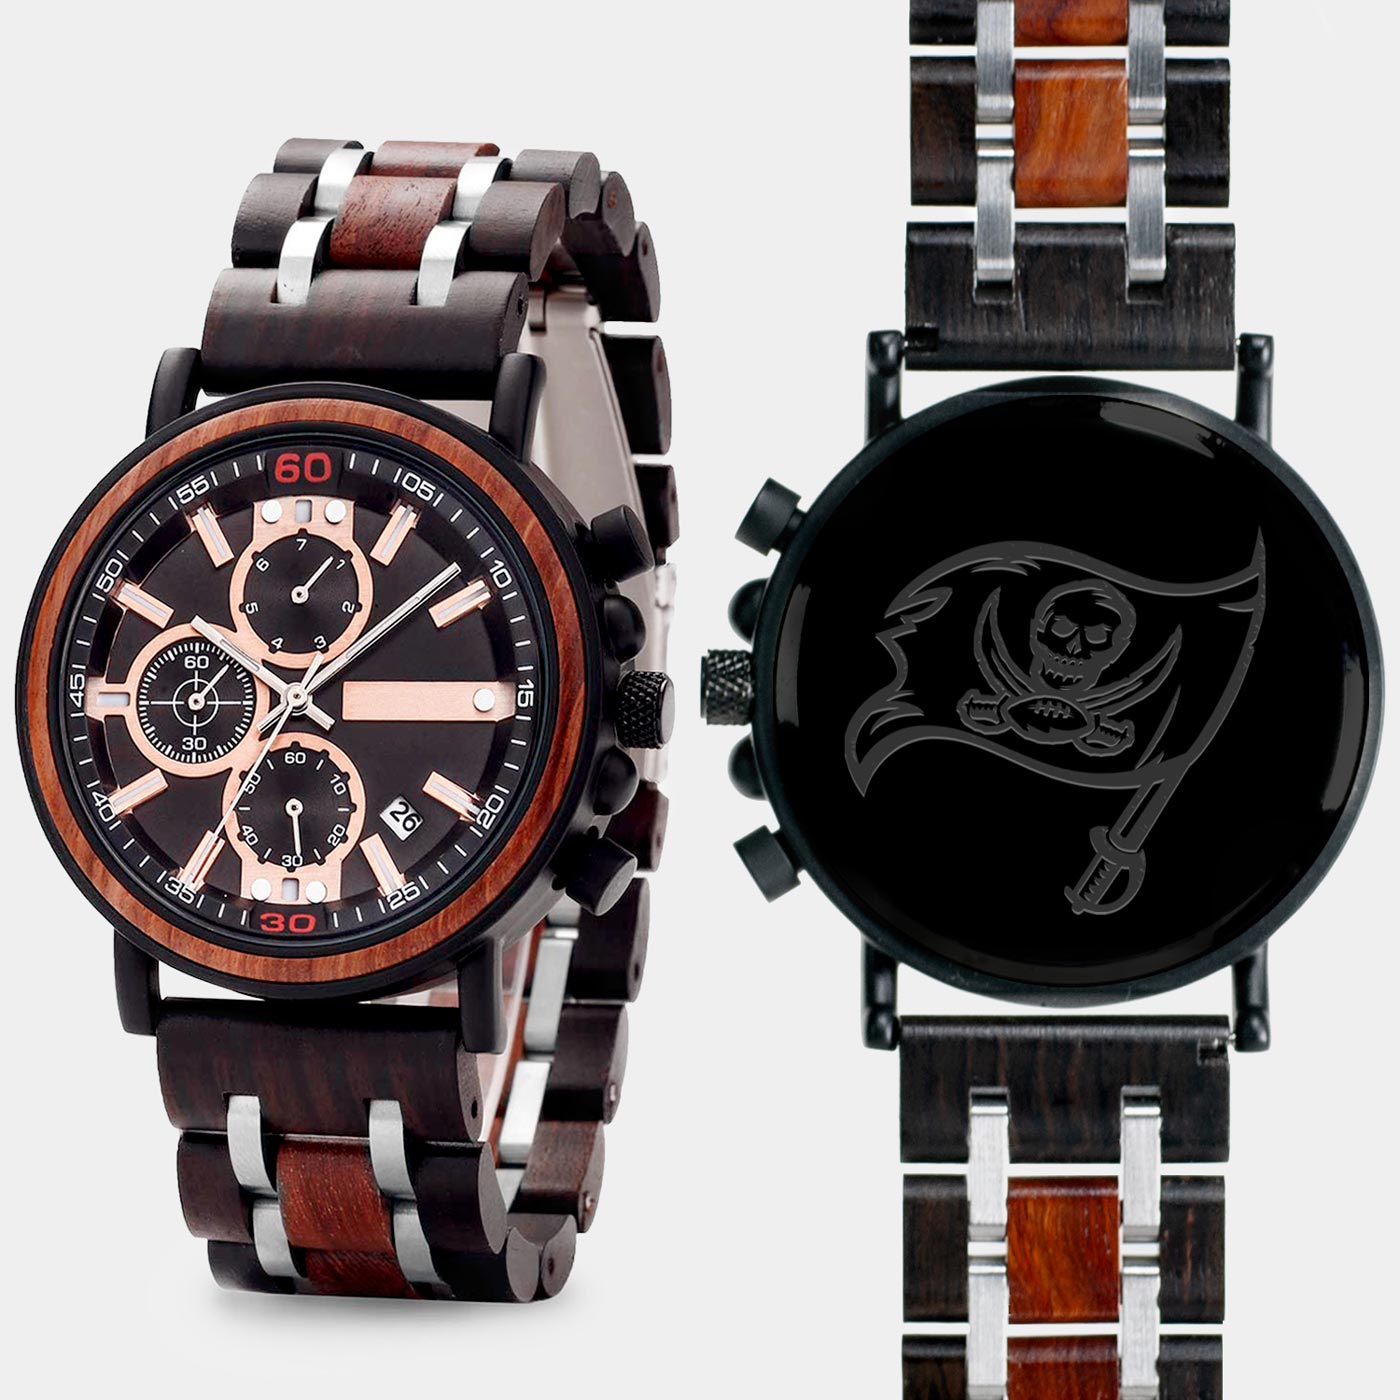 Tampa Bay Buccaneers Mens Wrist Watch  - Personalized Tampa Bay Buccaneers Mens Watches - Custom Gifts For Him, Birthday Gifts, Gift For Dad - Best 2022 Tampa Bay Buccaneers Christmas Gifts - Black 45mm NFL Wood Watch